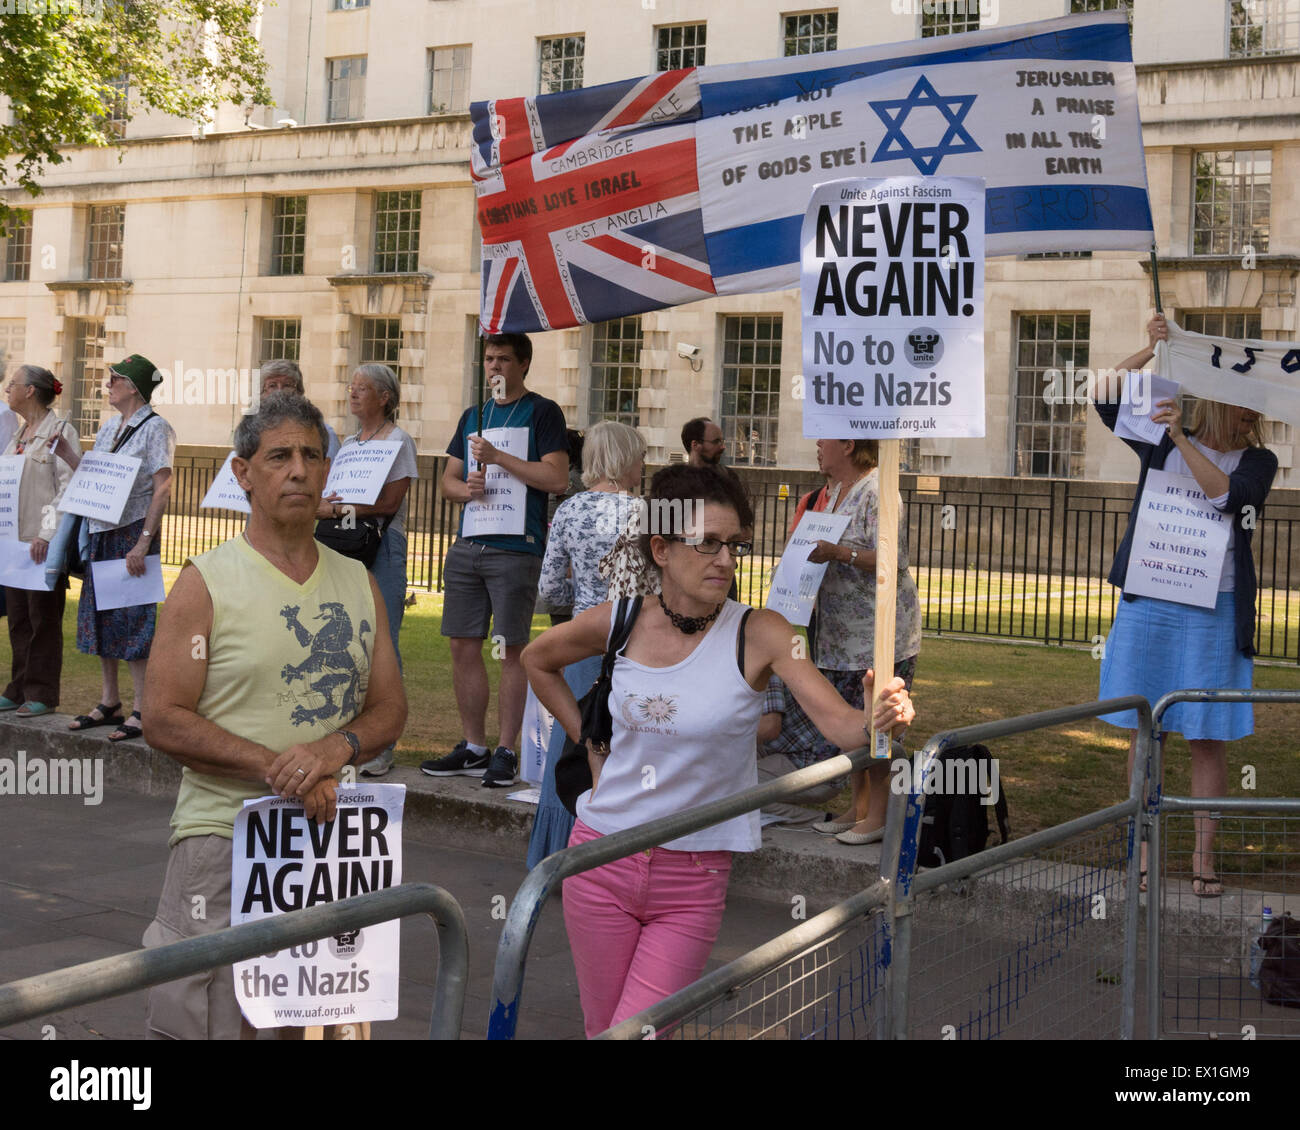 London, 04th July 2015. Anti-fascist protesters gather in Whitehall opposite Downing Street to oppose a Neo-Nazi protest dubbed 'Campaign 4 Truth'. The fascists original plan was to protest in the Jewish neighbourhood of Golders Green but the event was banned and moved to Whitehall outside Downing Street by the Metropolitan Police.  Credit:  Patricia Phillips/Alamy Live News Stock Photo